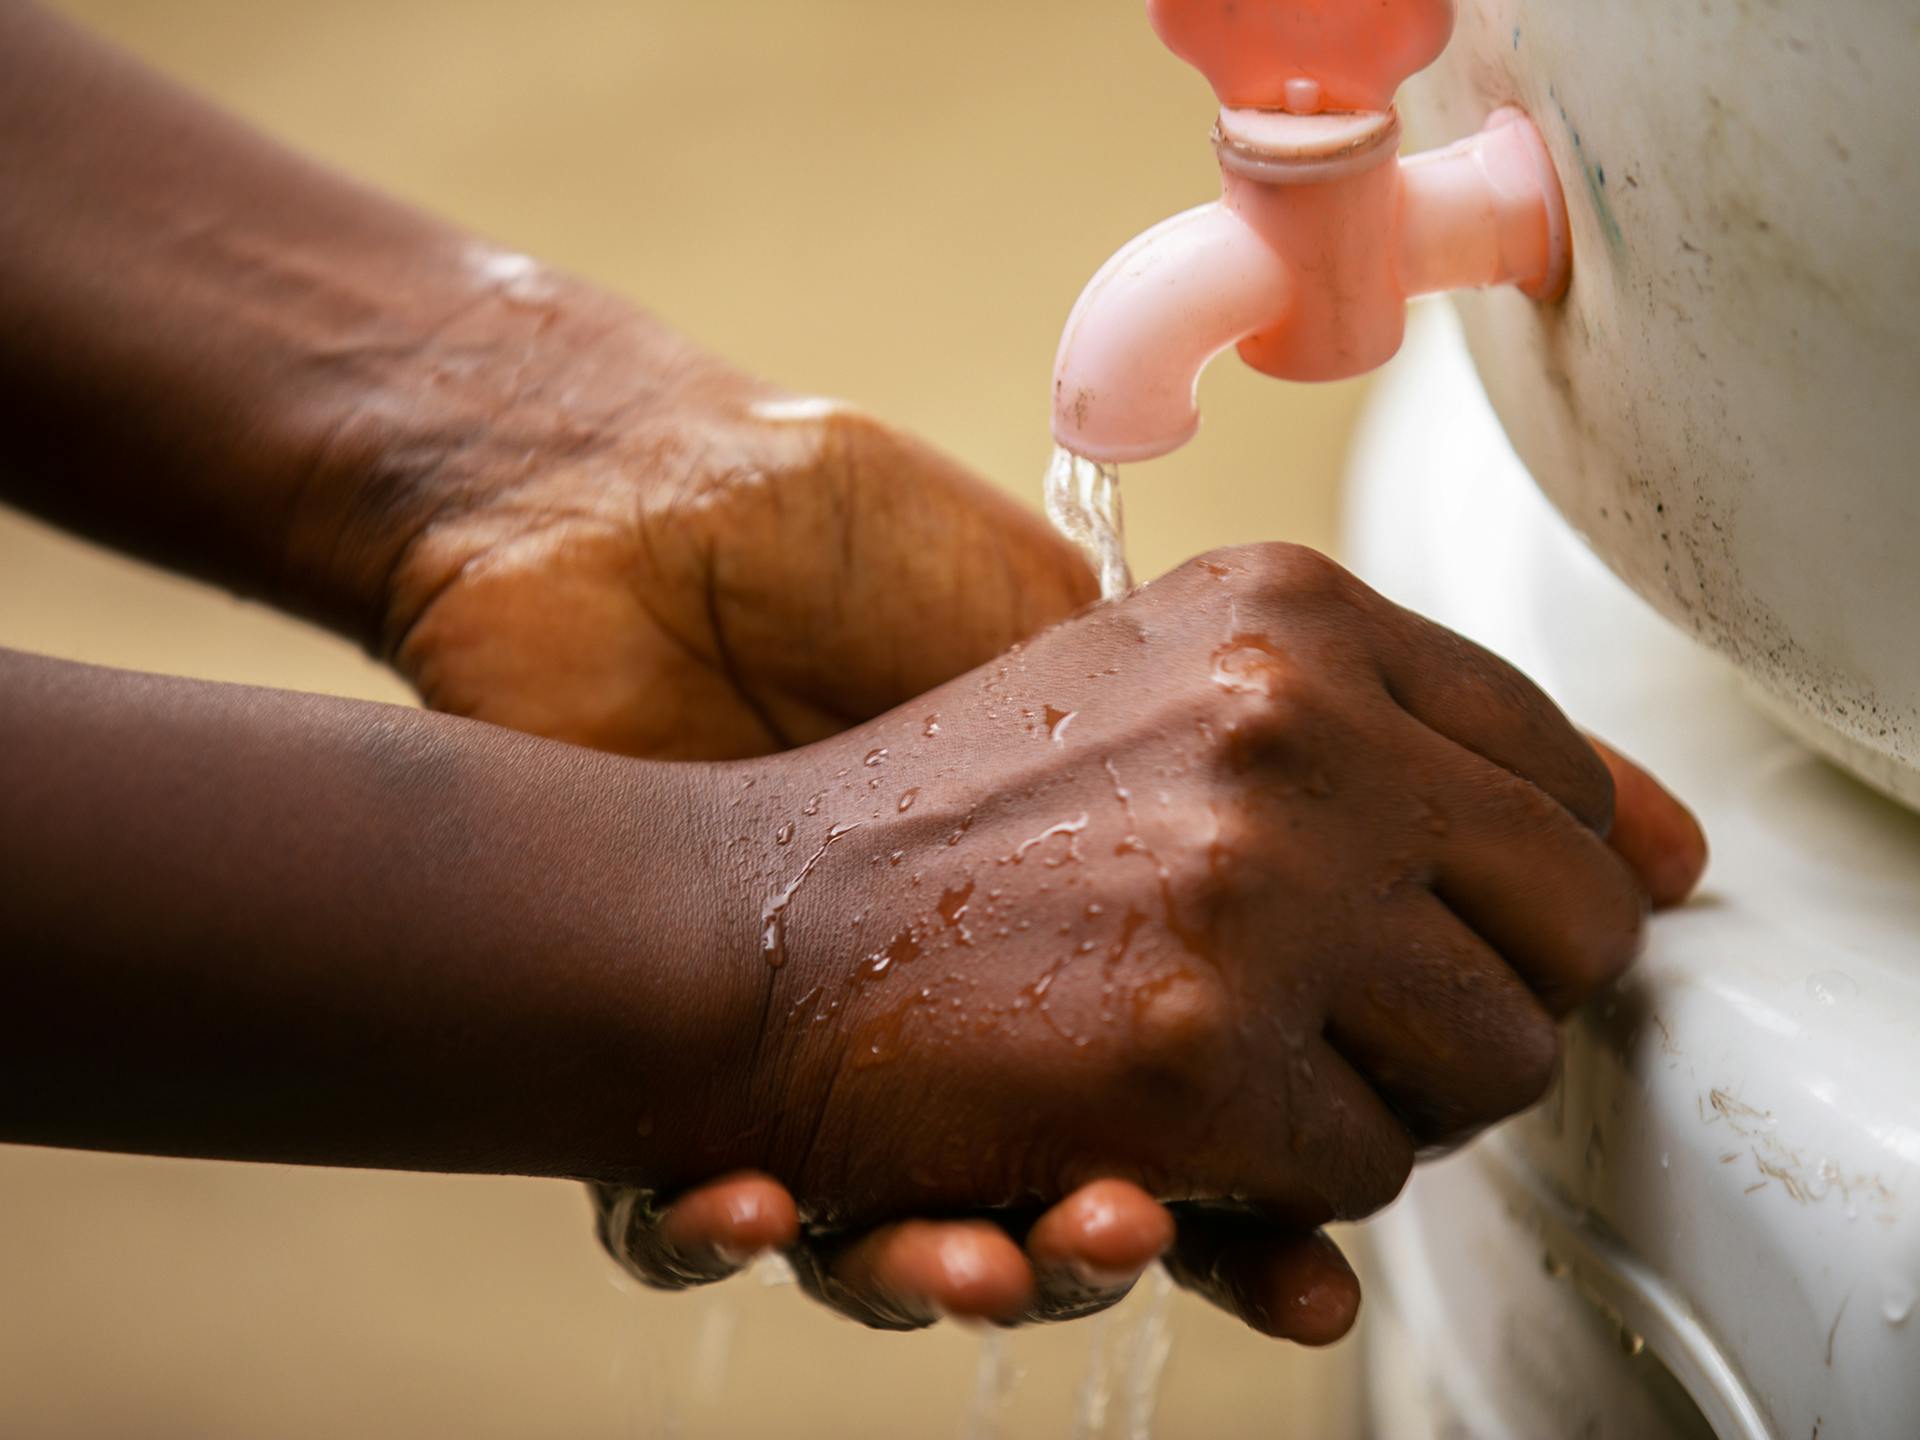 Two hands washing with water